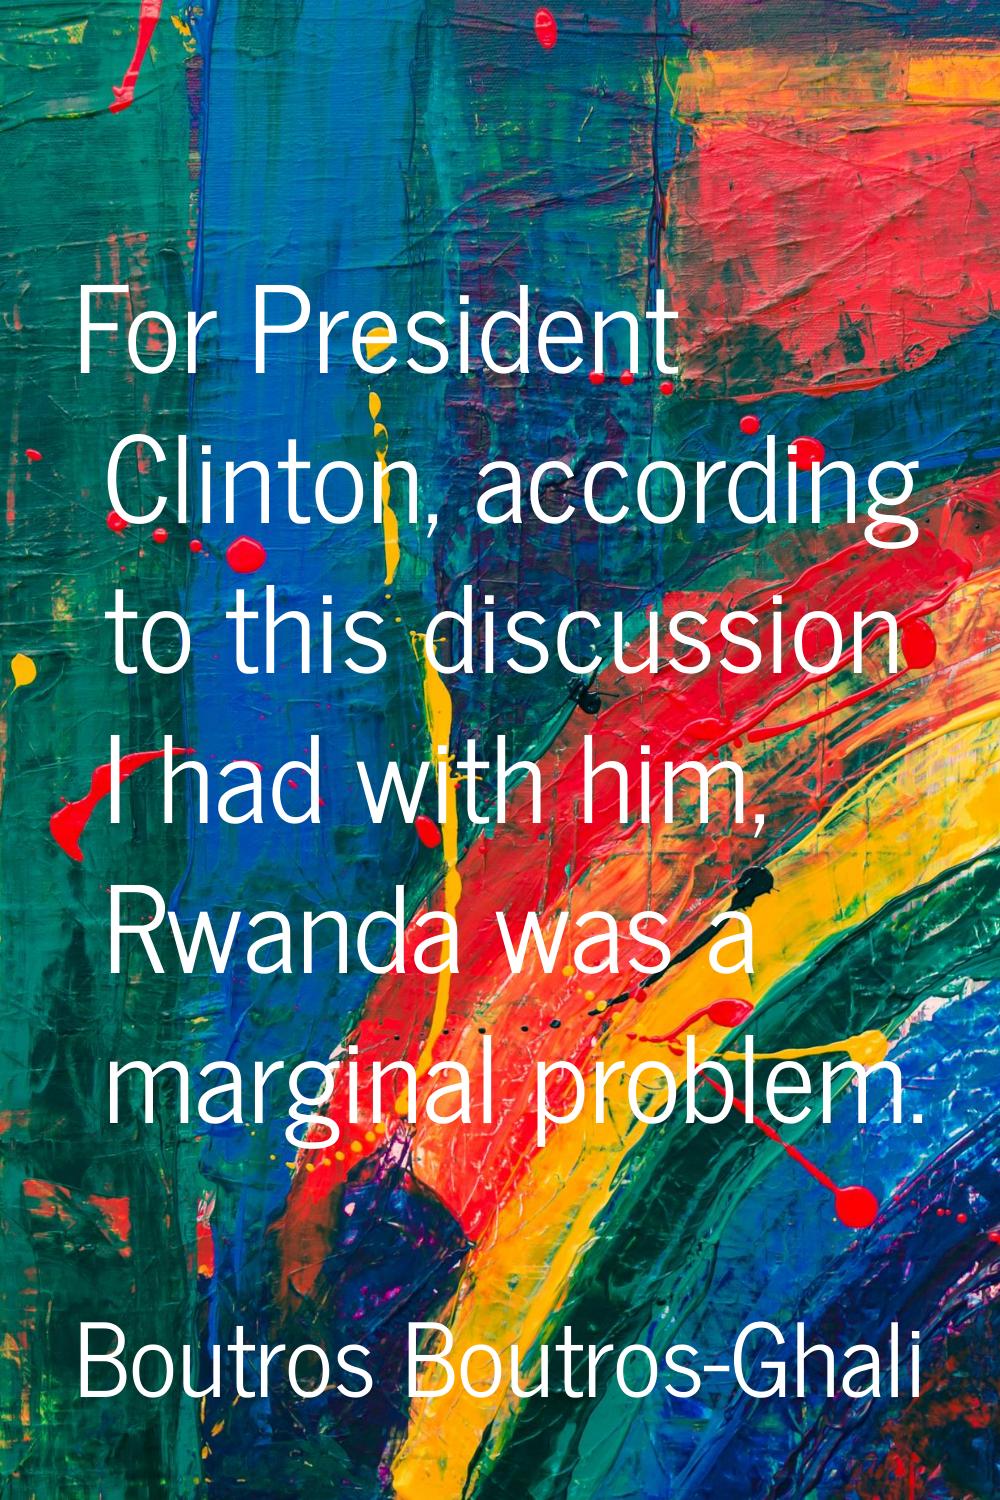 For President Clinton, according to this discussion I had with him, Rwanda was a marginal problem.